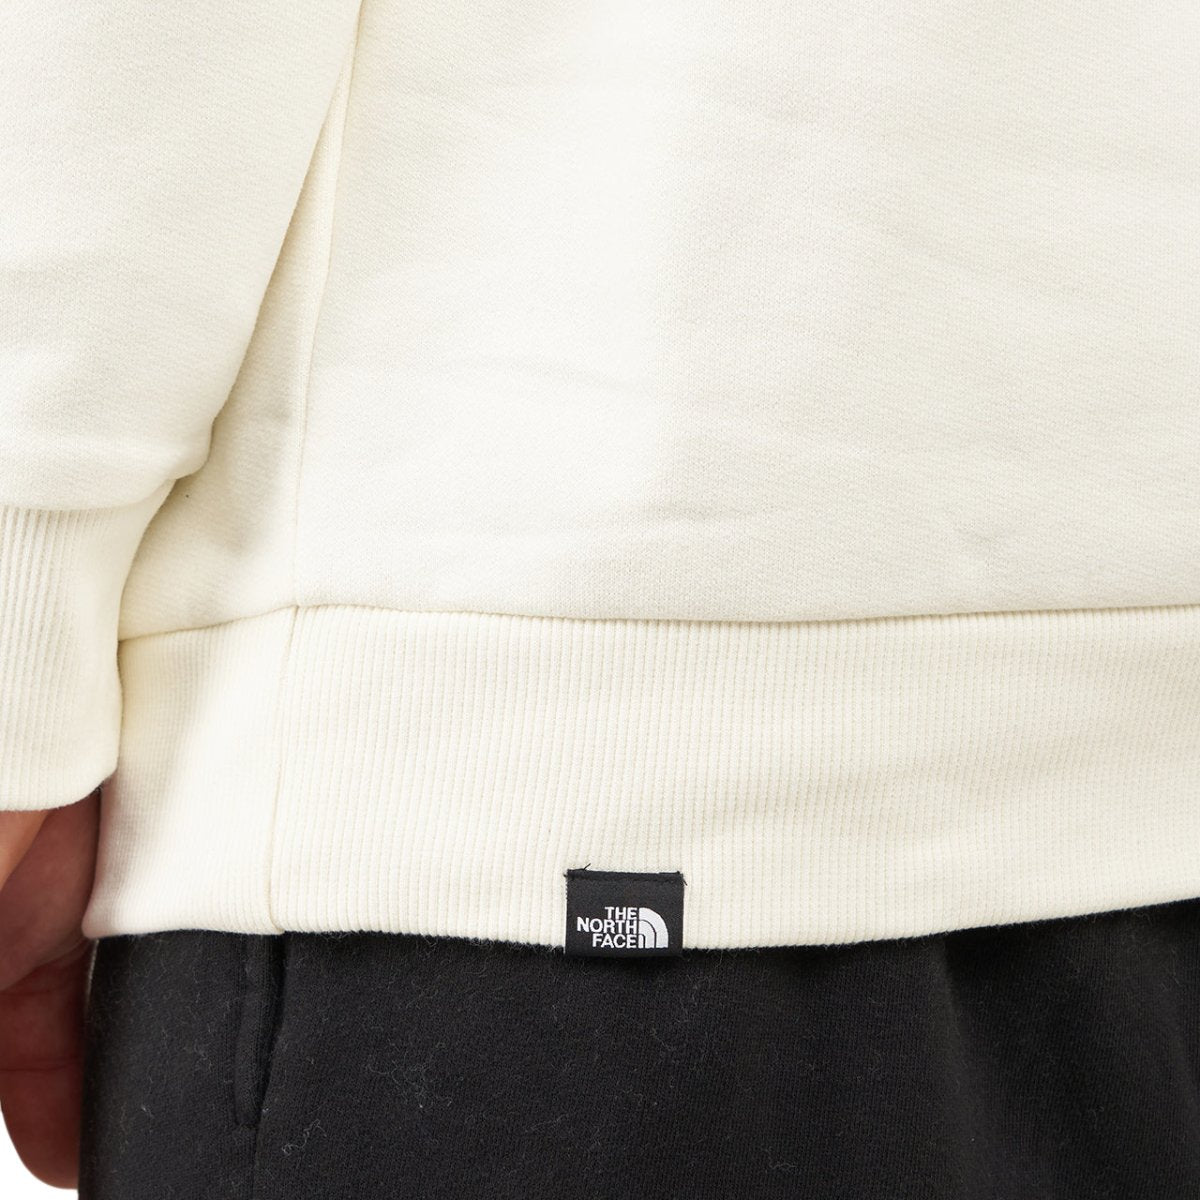 The North Face Coordinates Crewneck (Weiß)  - Allike Store